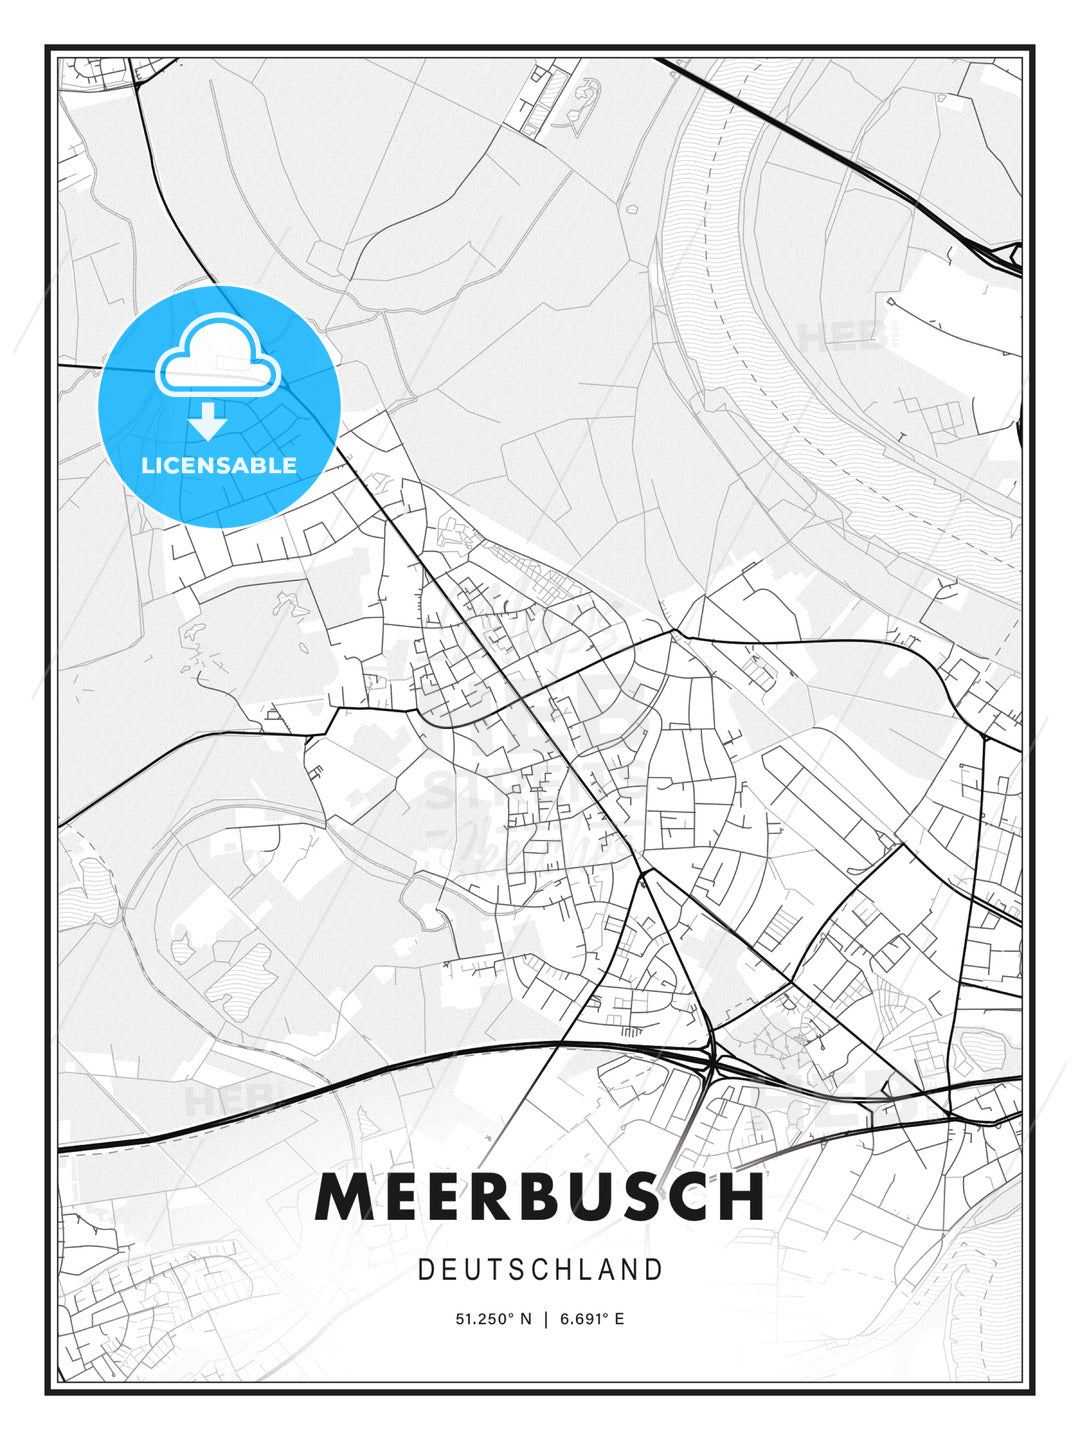 Meerbusch, Germany, Modern Print Template in Various Formats - HEBSTREITS Sketches